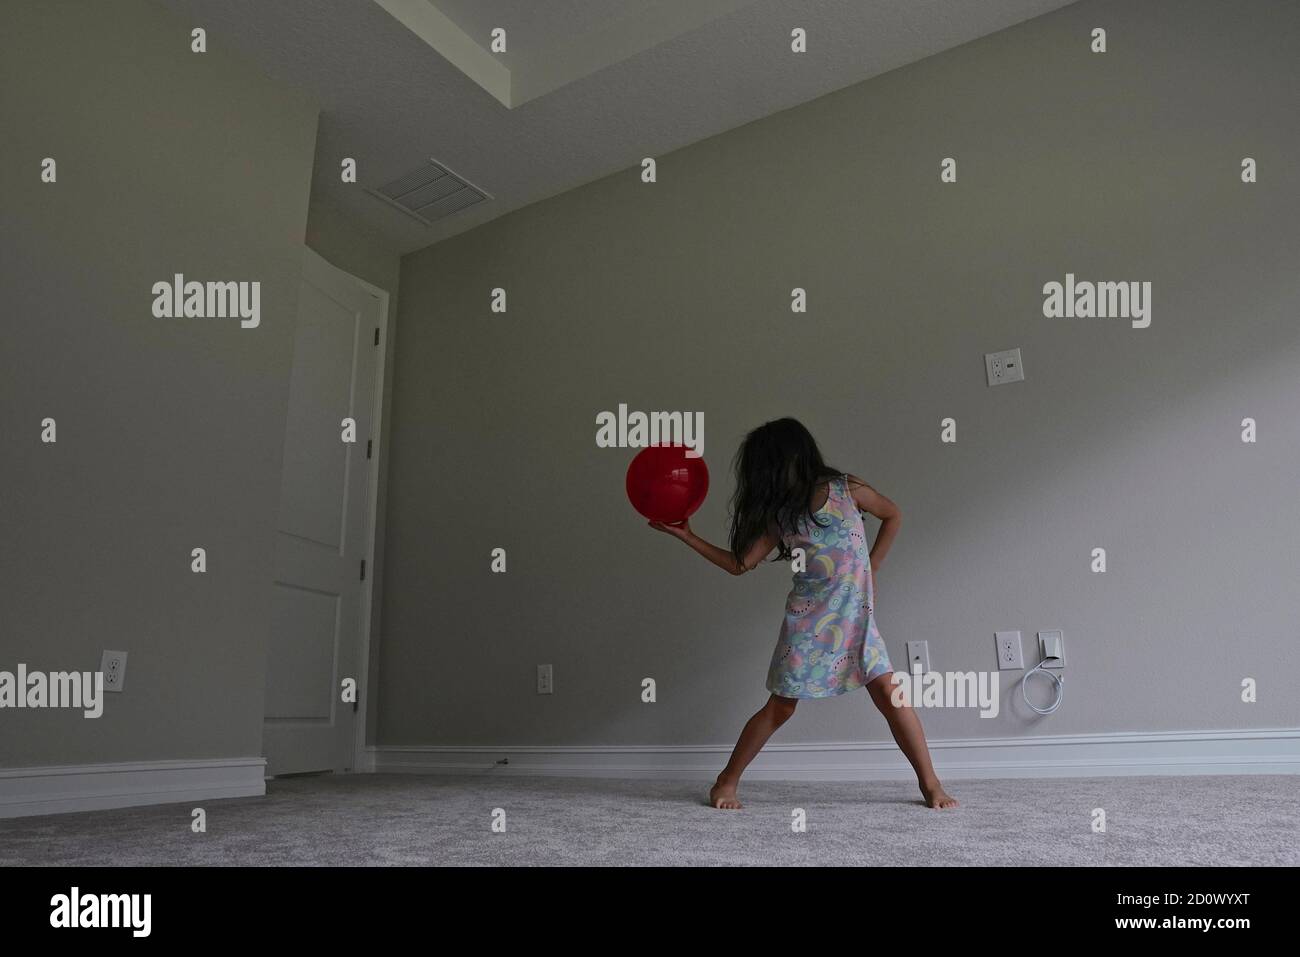 Five year old girl playing with a red balloon in an empty room Stock Photo